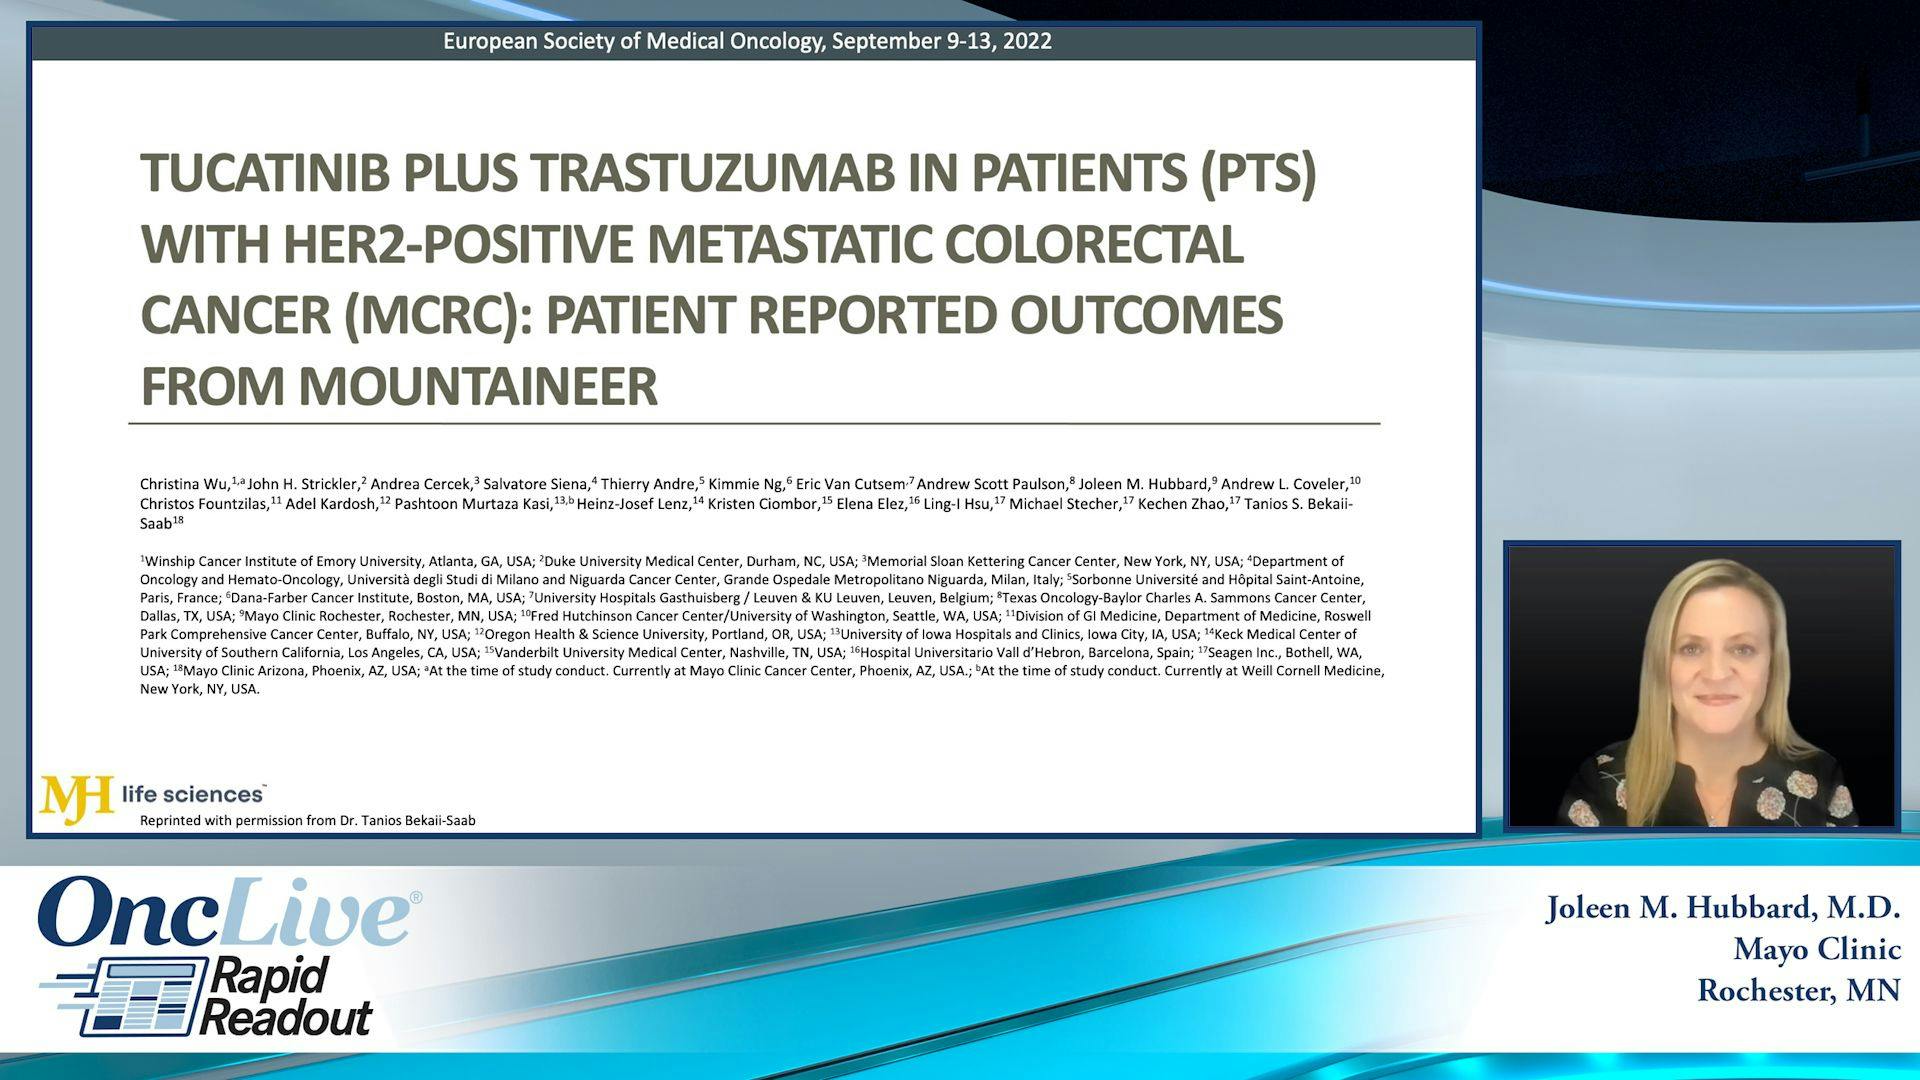 Tucatinib plus trastuzumab in patients (pts) with HER2-Positive Metastatic Colorectal Cancer (mCRC): Patient Reported Outcomes from MOUNTAINEER